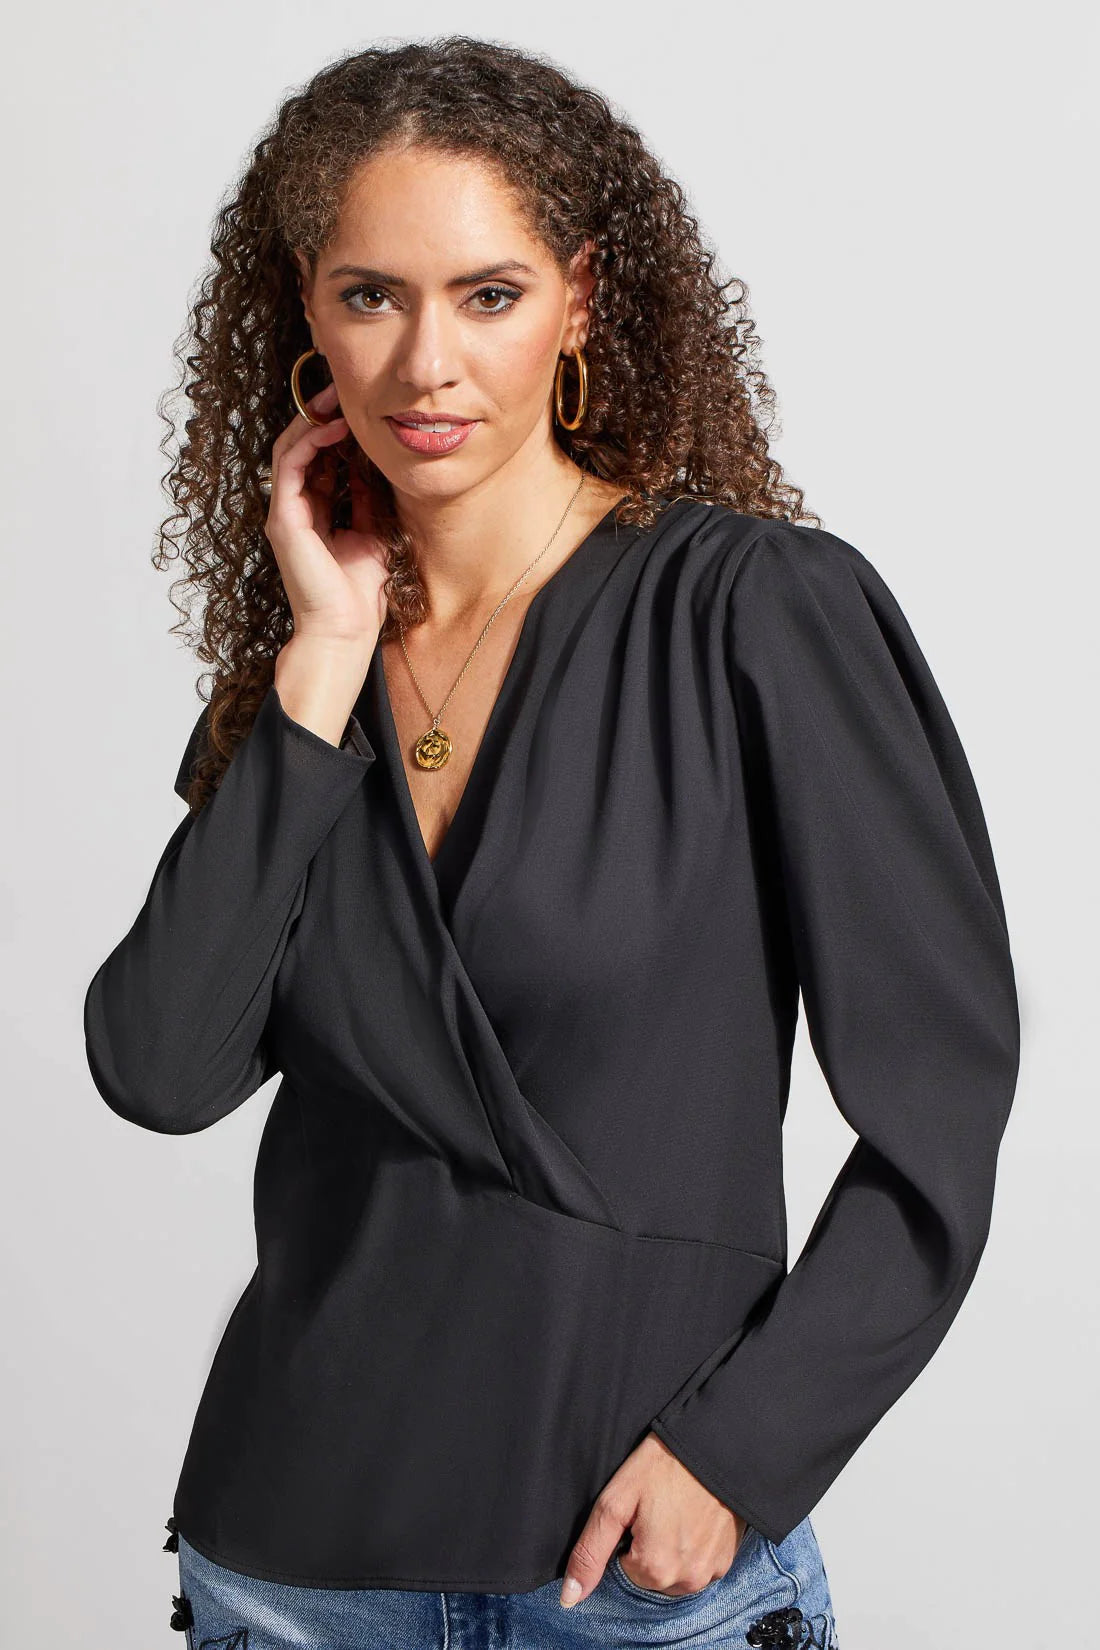 You'll be a vision of captivating cosmopolitan style with this wrap blouse in your collection. 